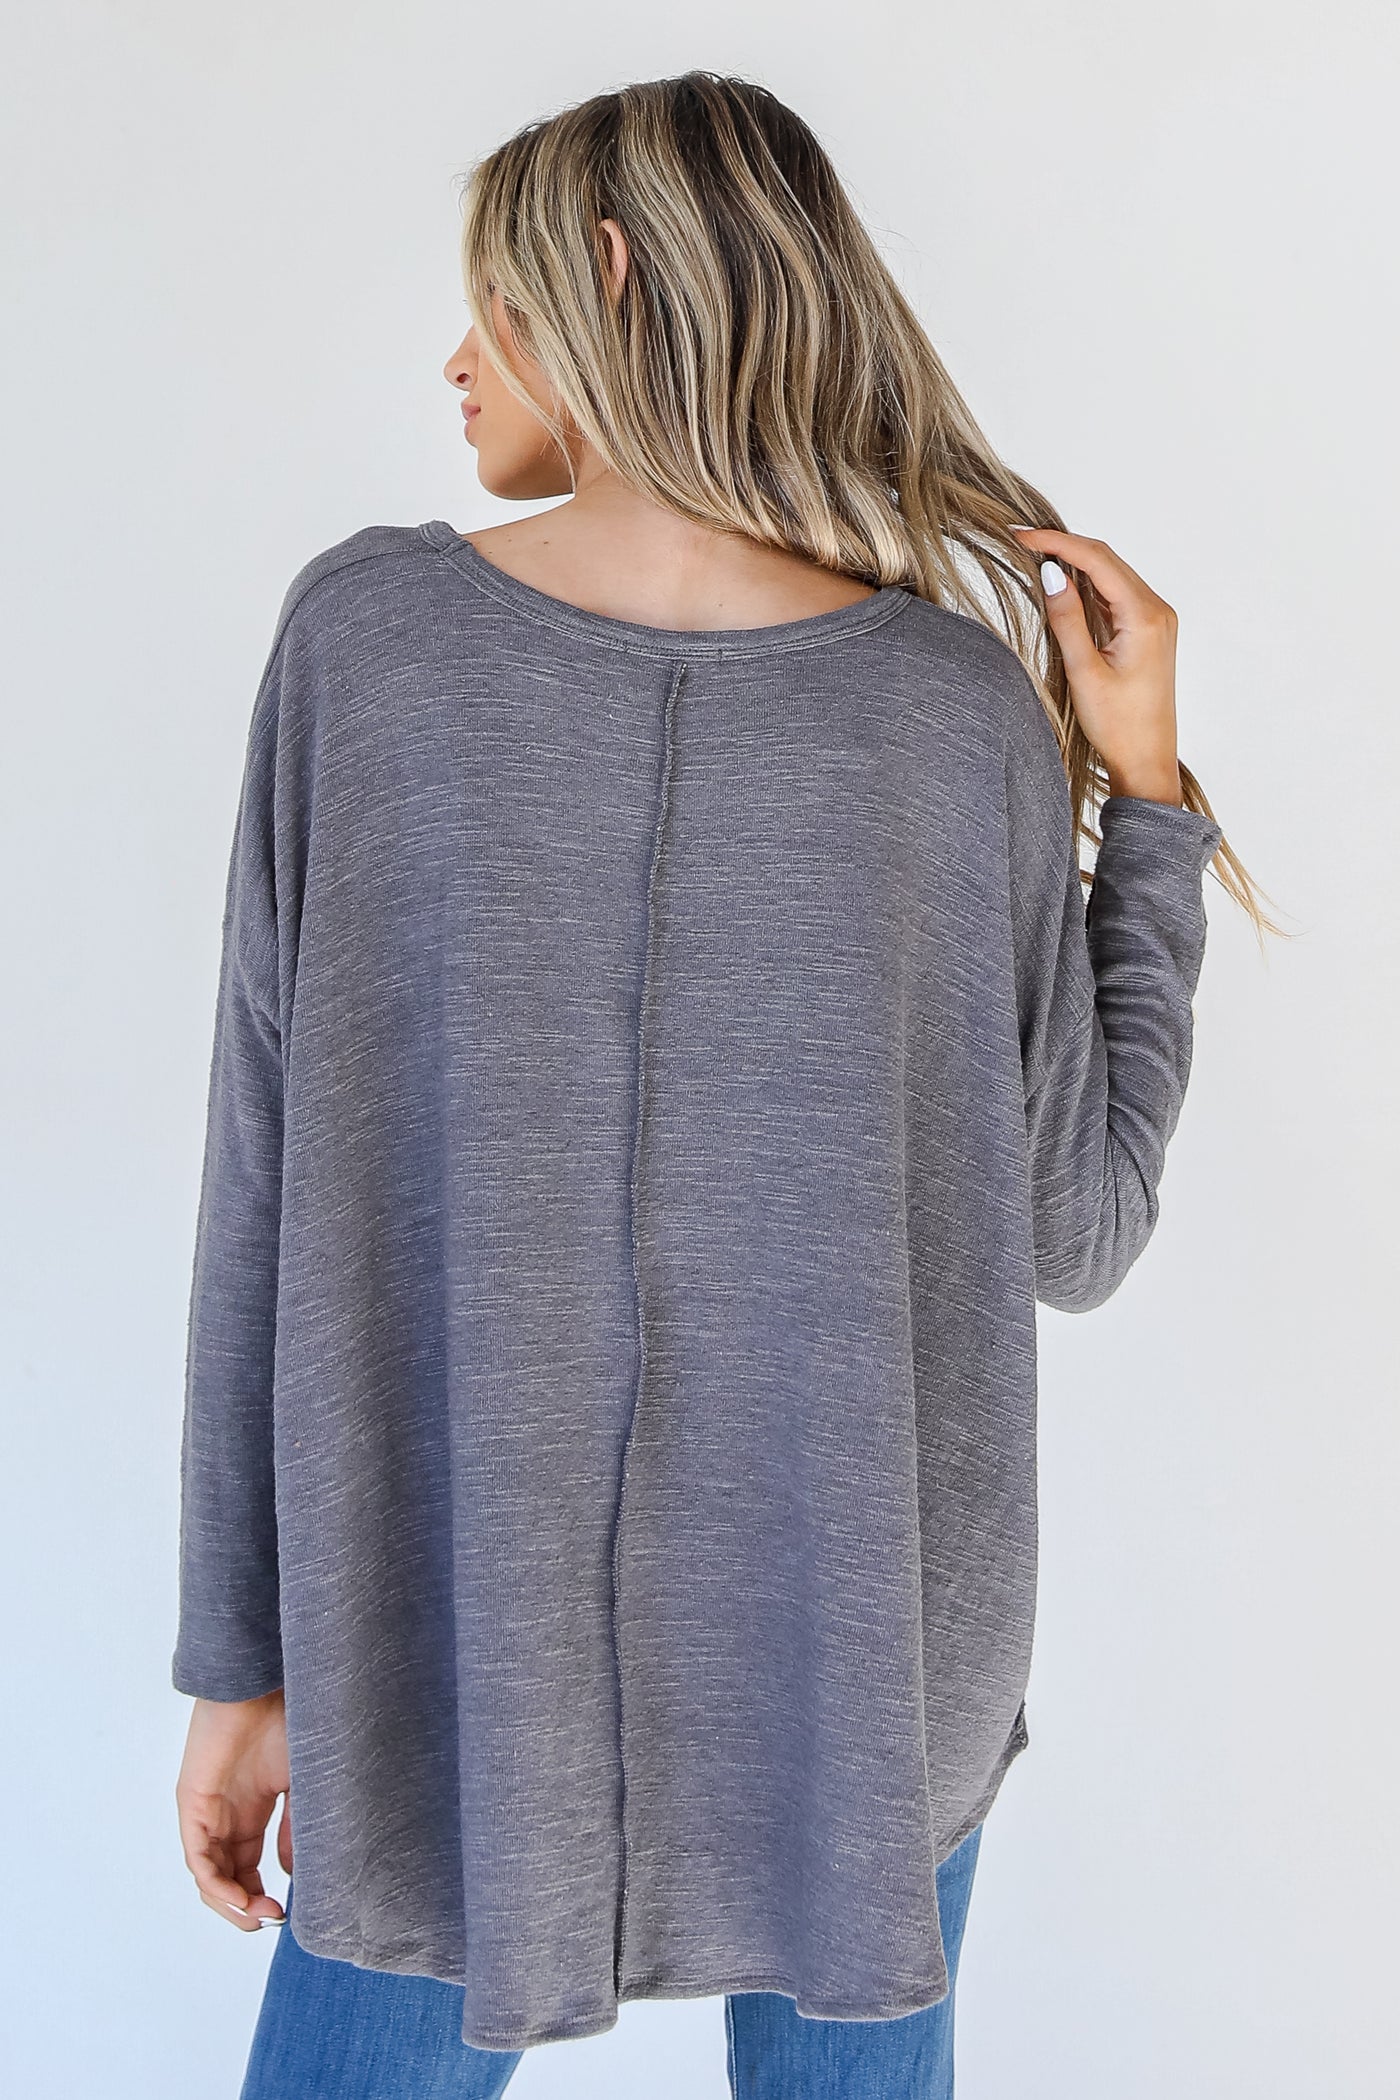 Oversized Knit Top back view